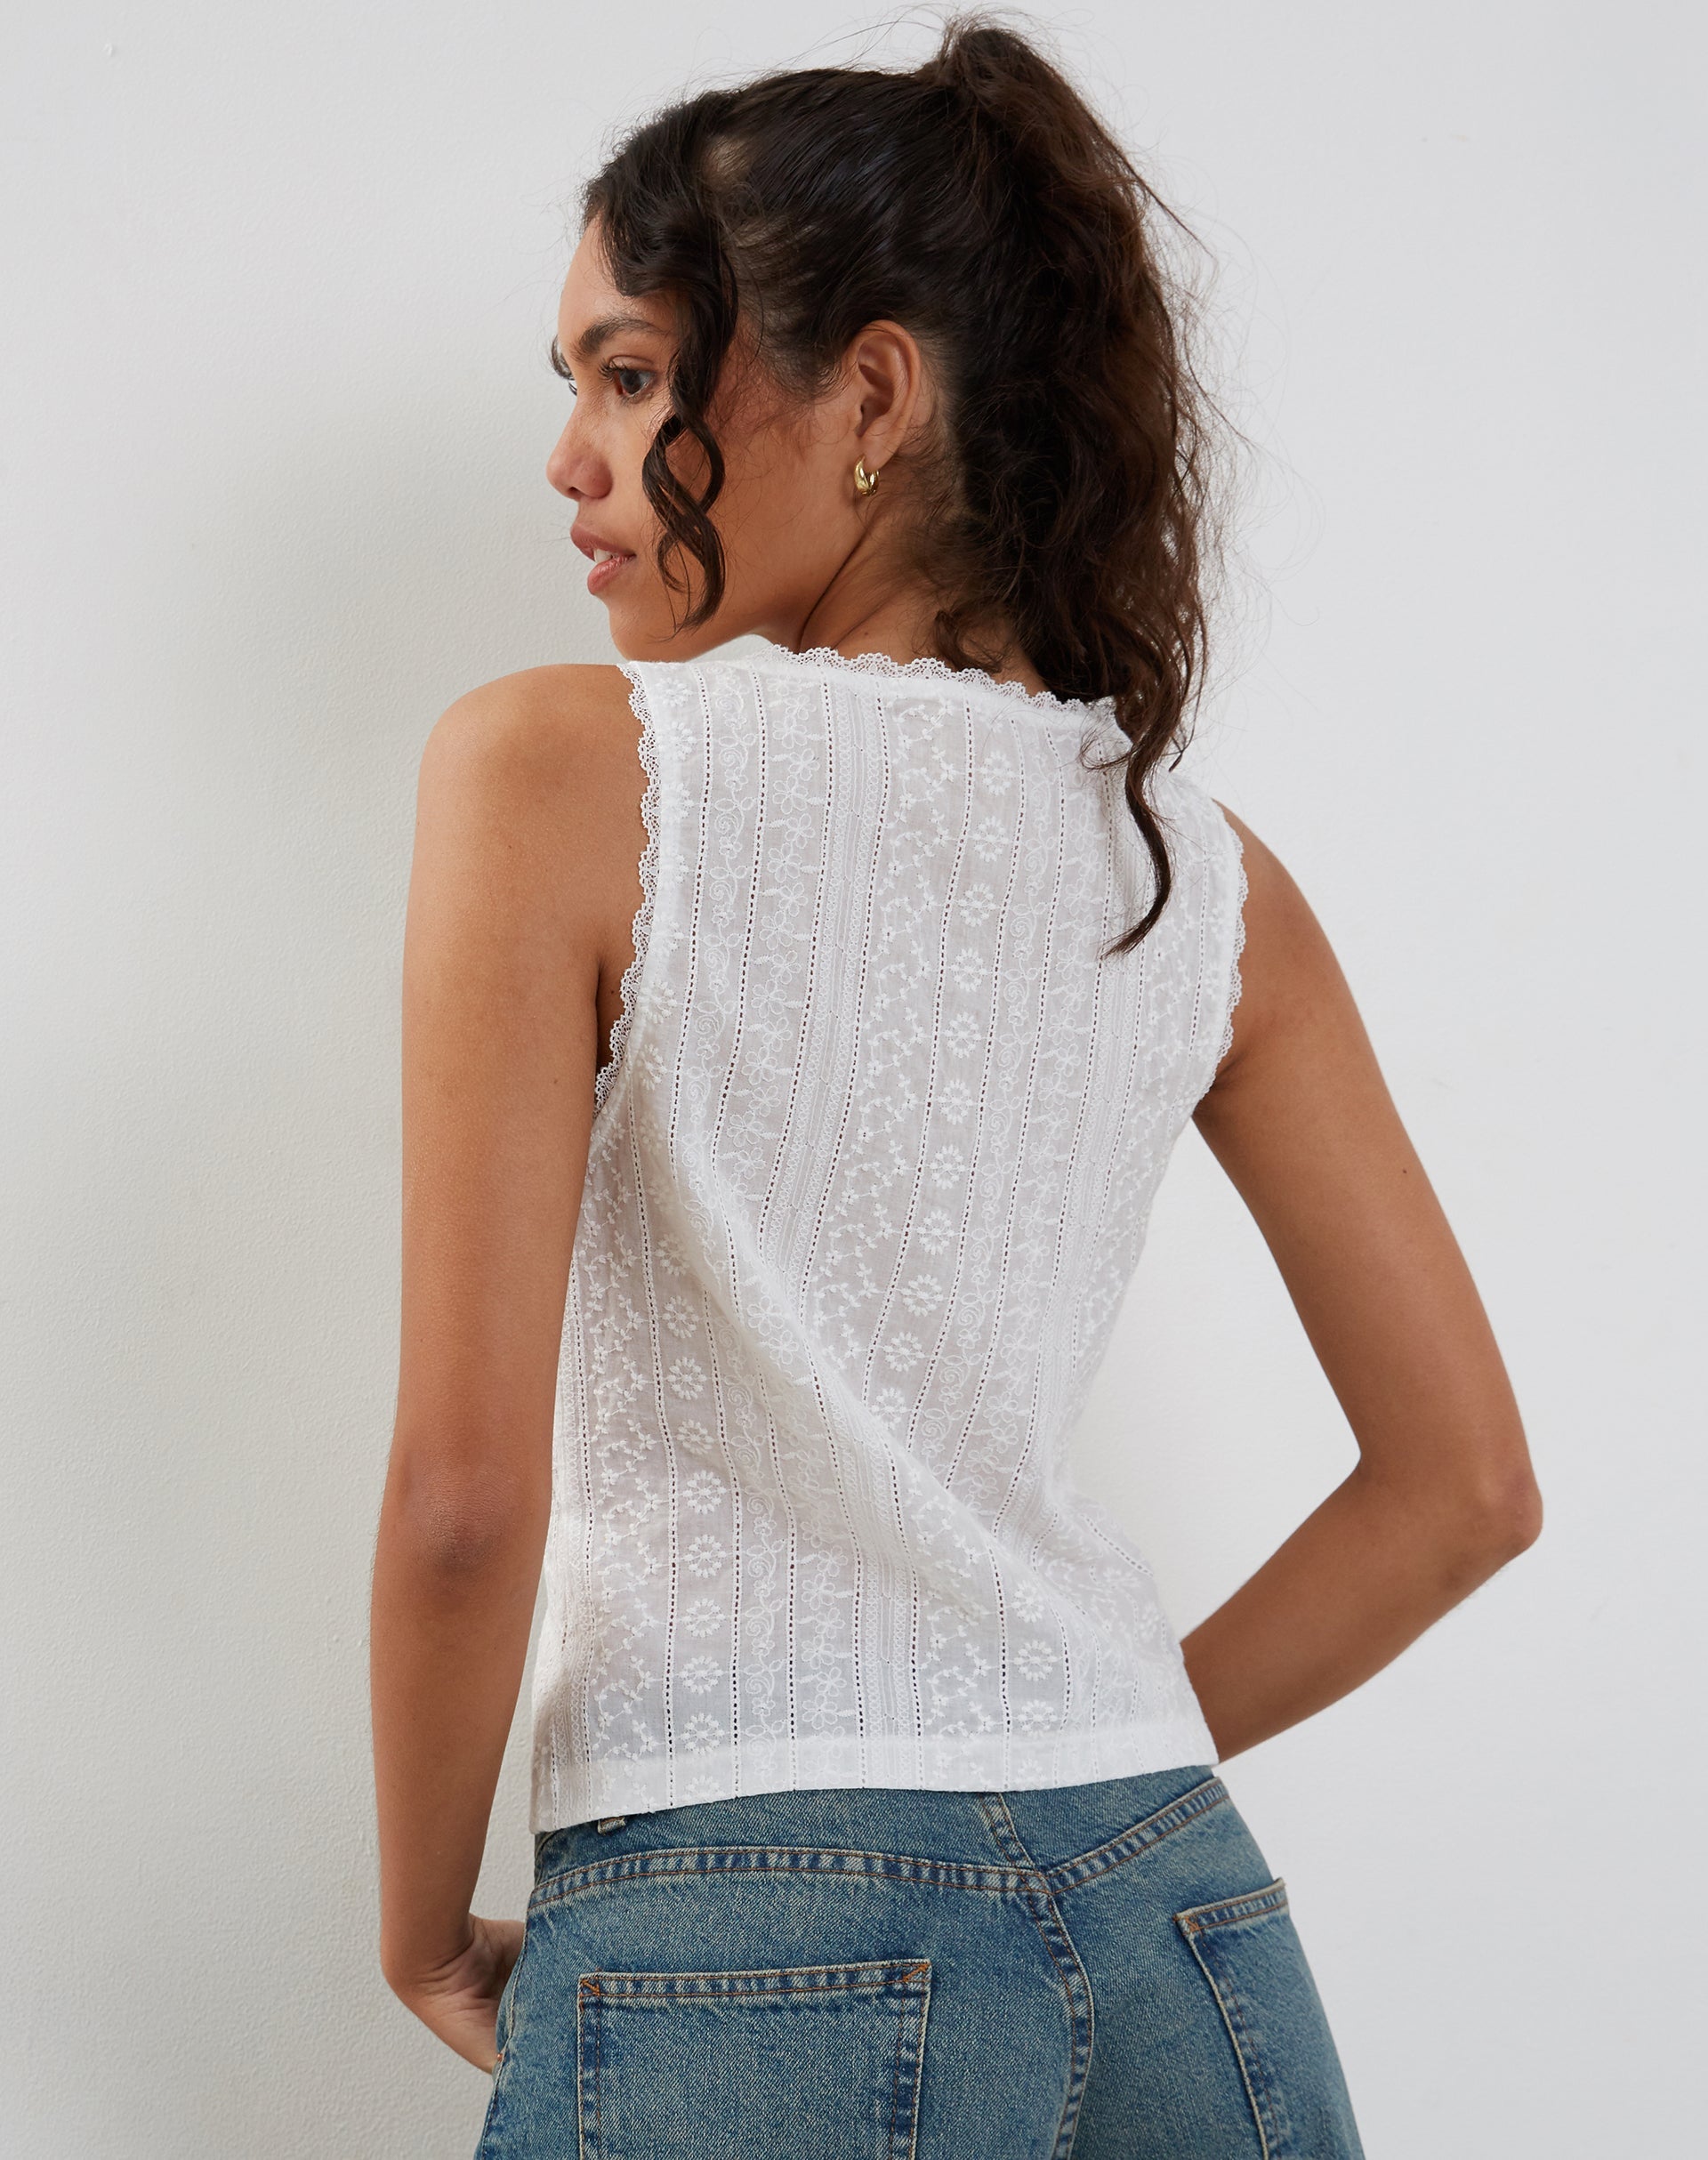 Image of Vezia broderie Sleeveless Top in White with Rose Embroidery